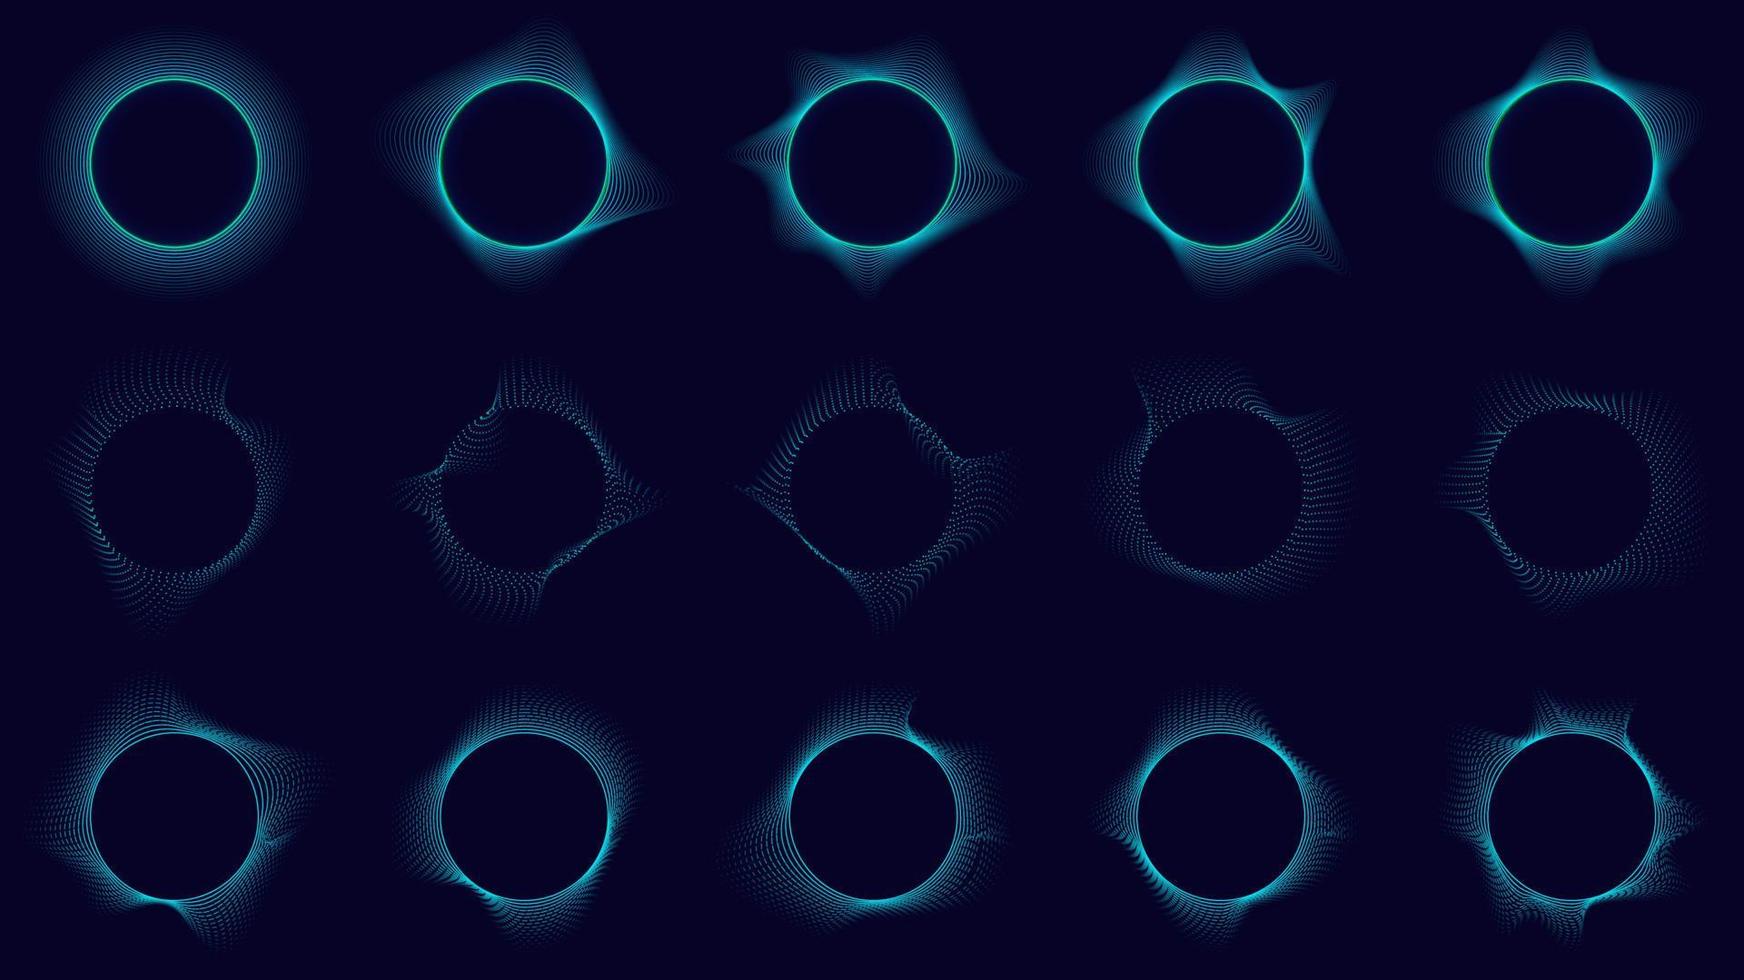 Set of technology abstrcat blue circles elements wave lines on dark background vector